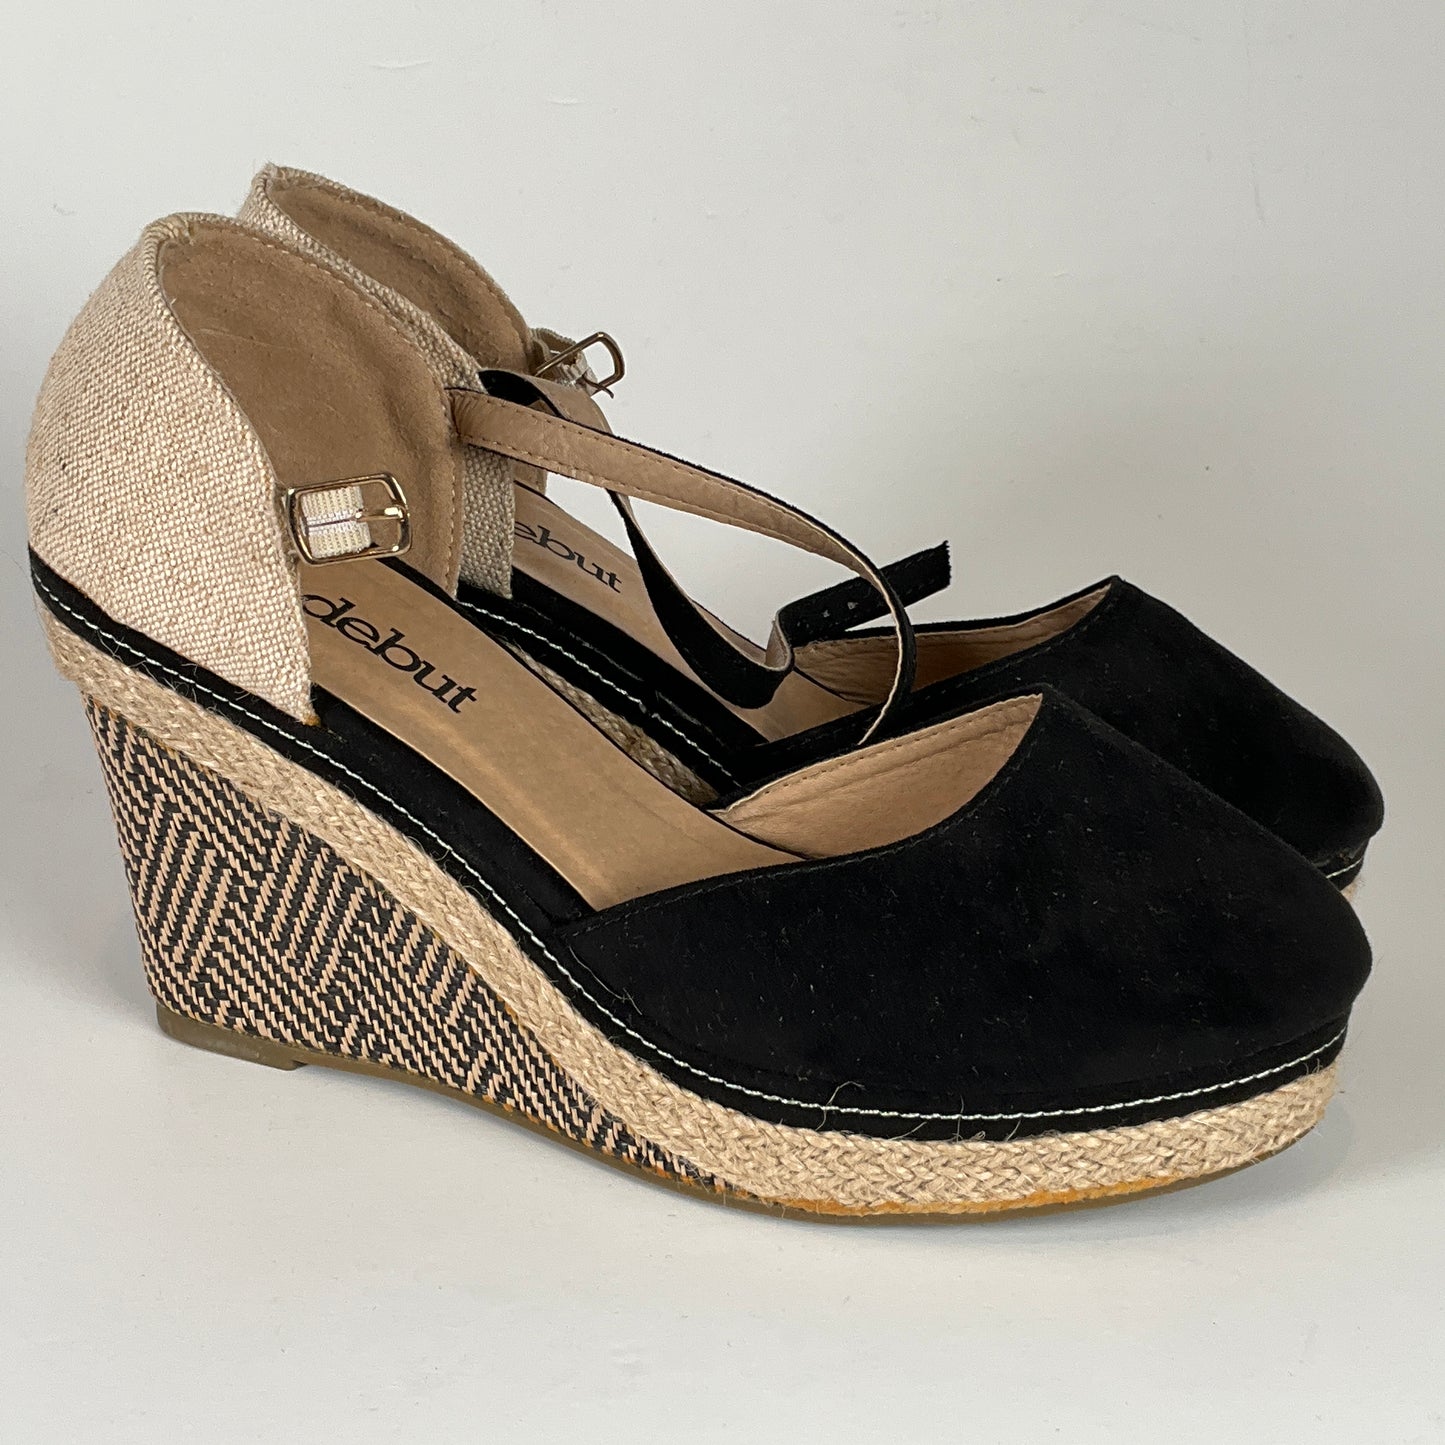 Debut - Wedges - Size 8